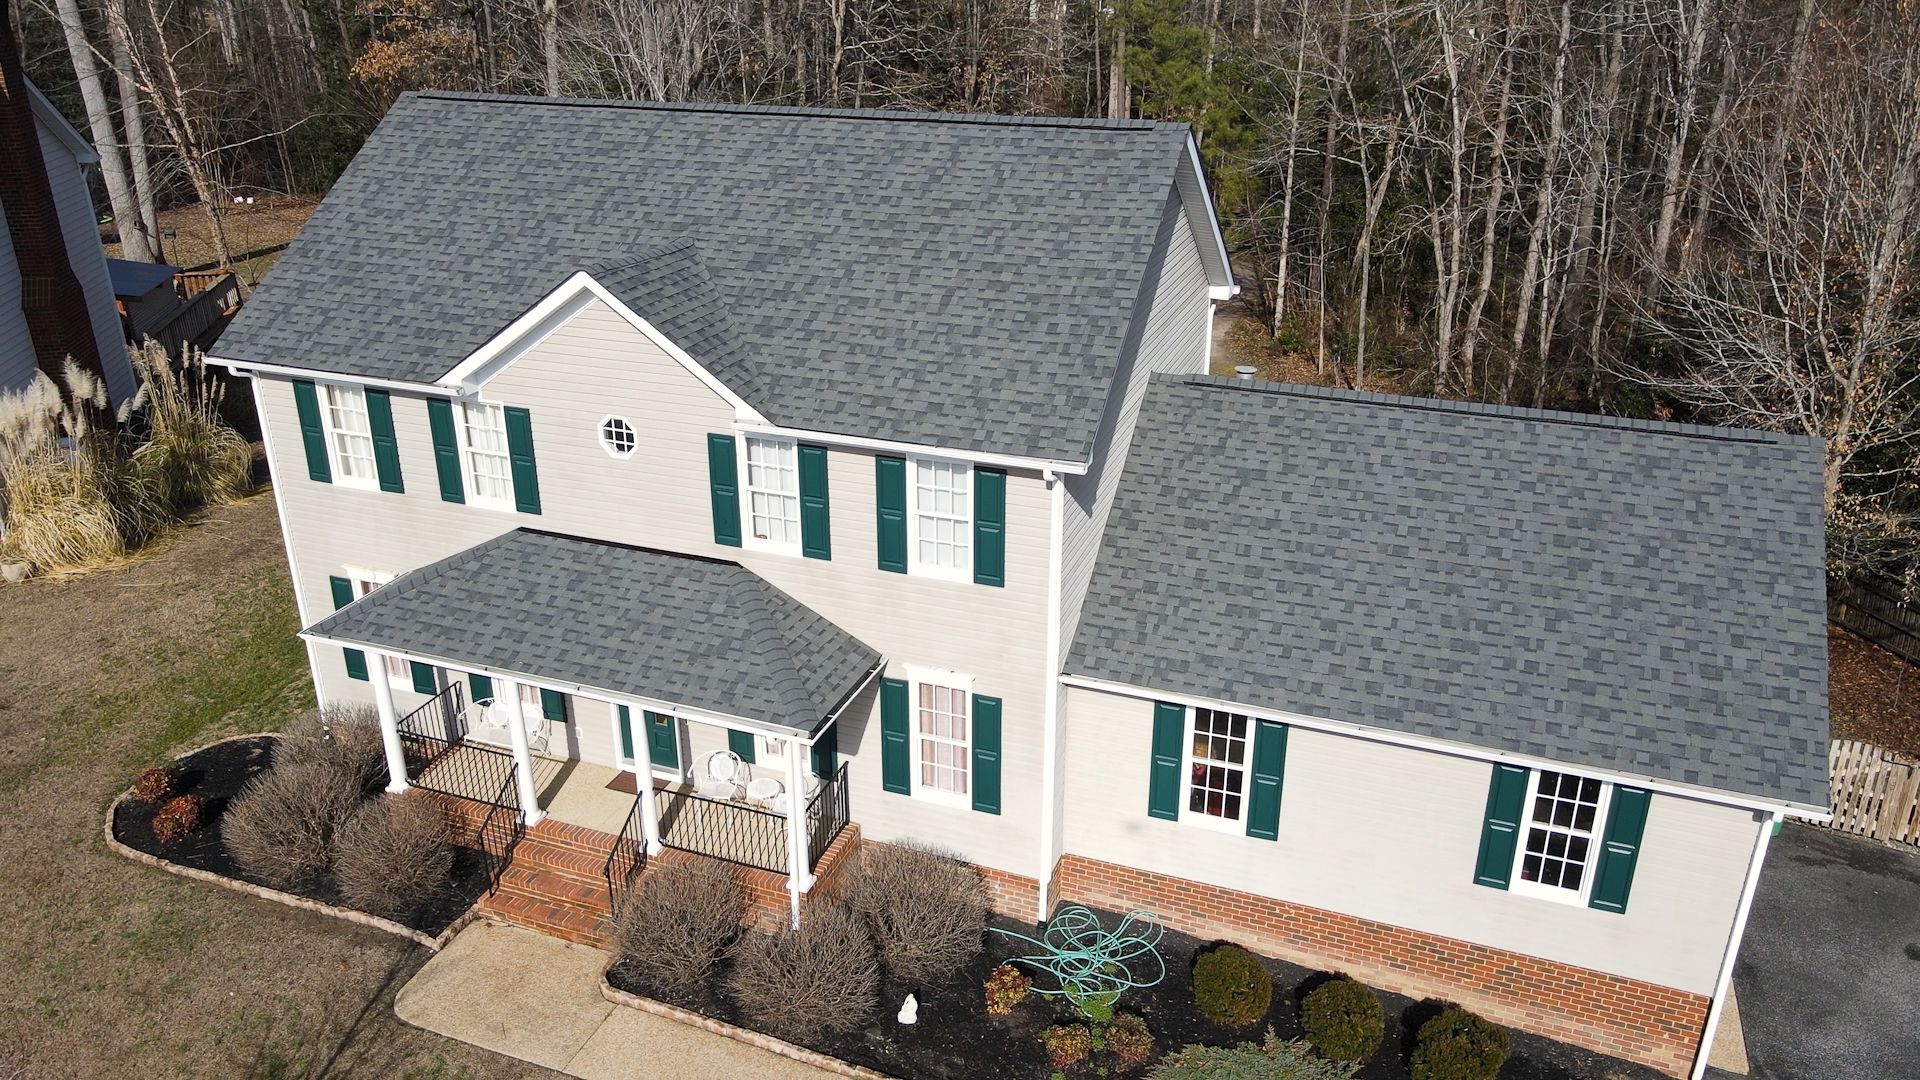 Retex replaced the roof on this Aylett VA home with Owens Corning architectural shingles in January 2023.